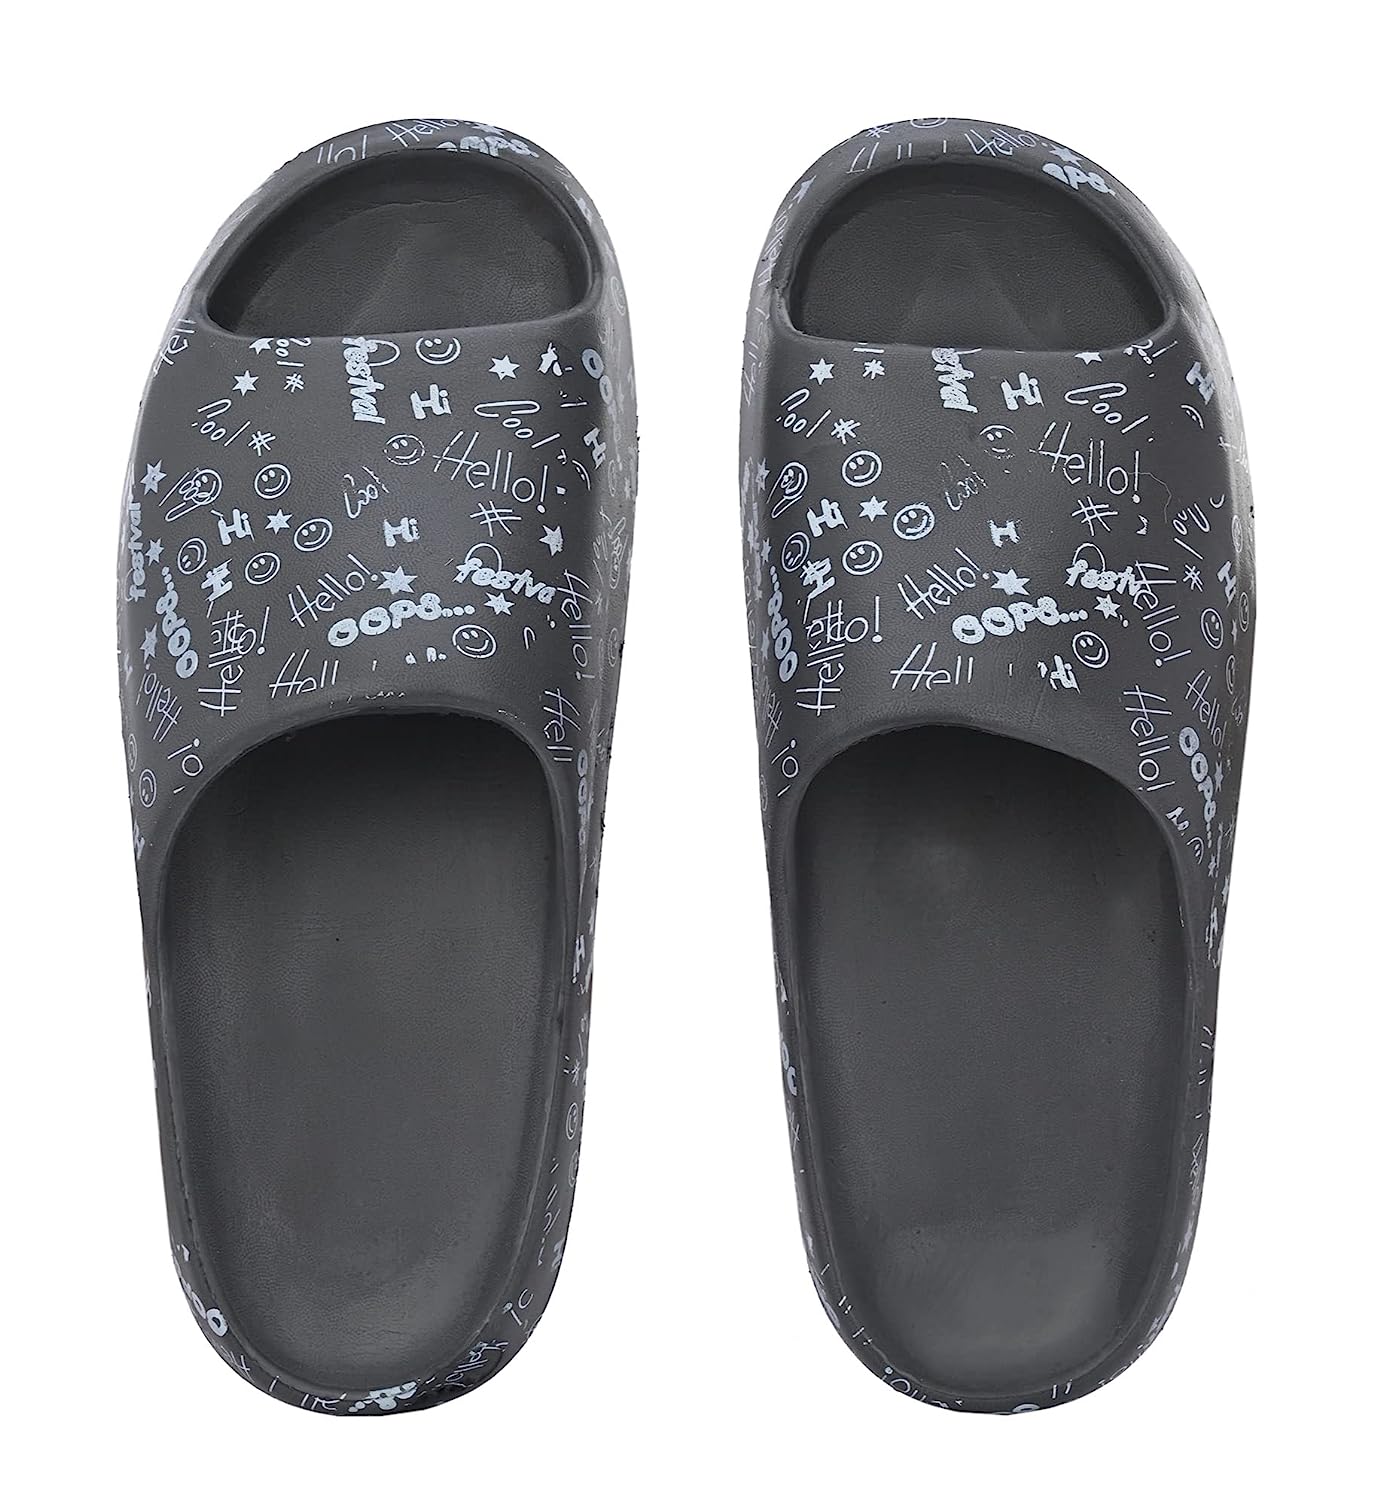 AFROJACK Womens Printed Flip Flops | Slip On | Comfortable Sliders -  Fashion Slippers in Sri Lanka from Arcade Online Shopping - Just Rs. 4499!